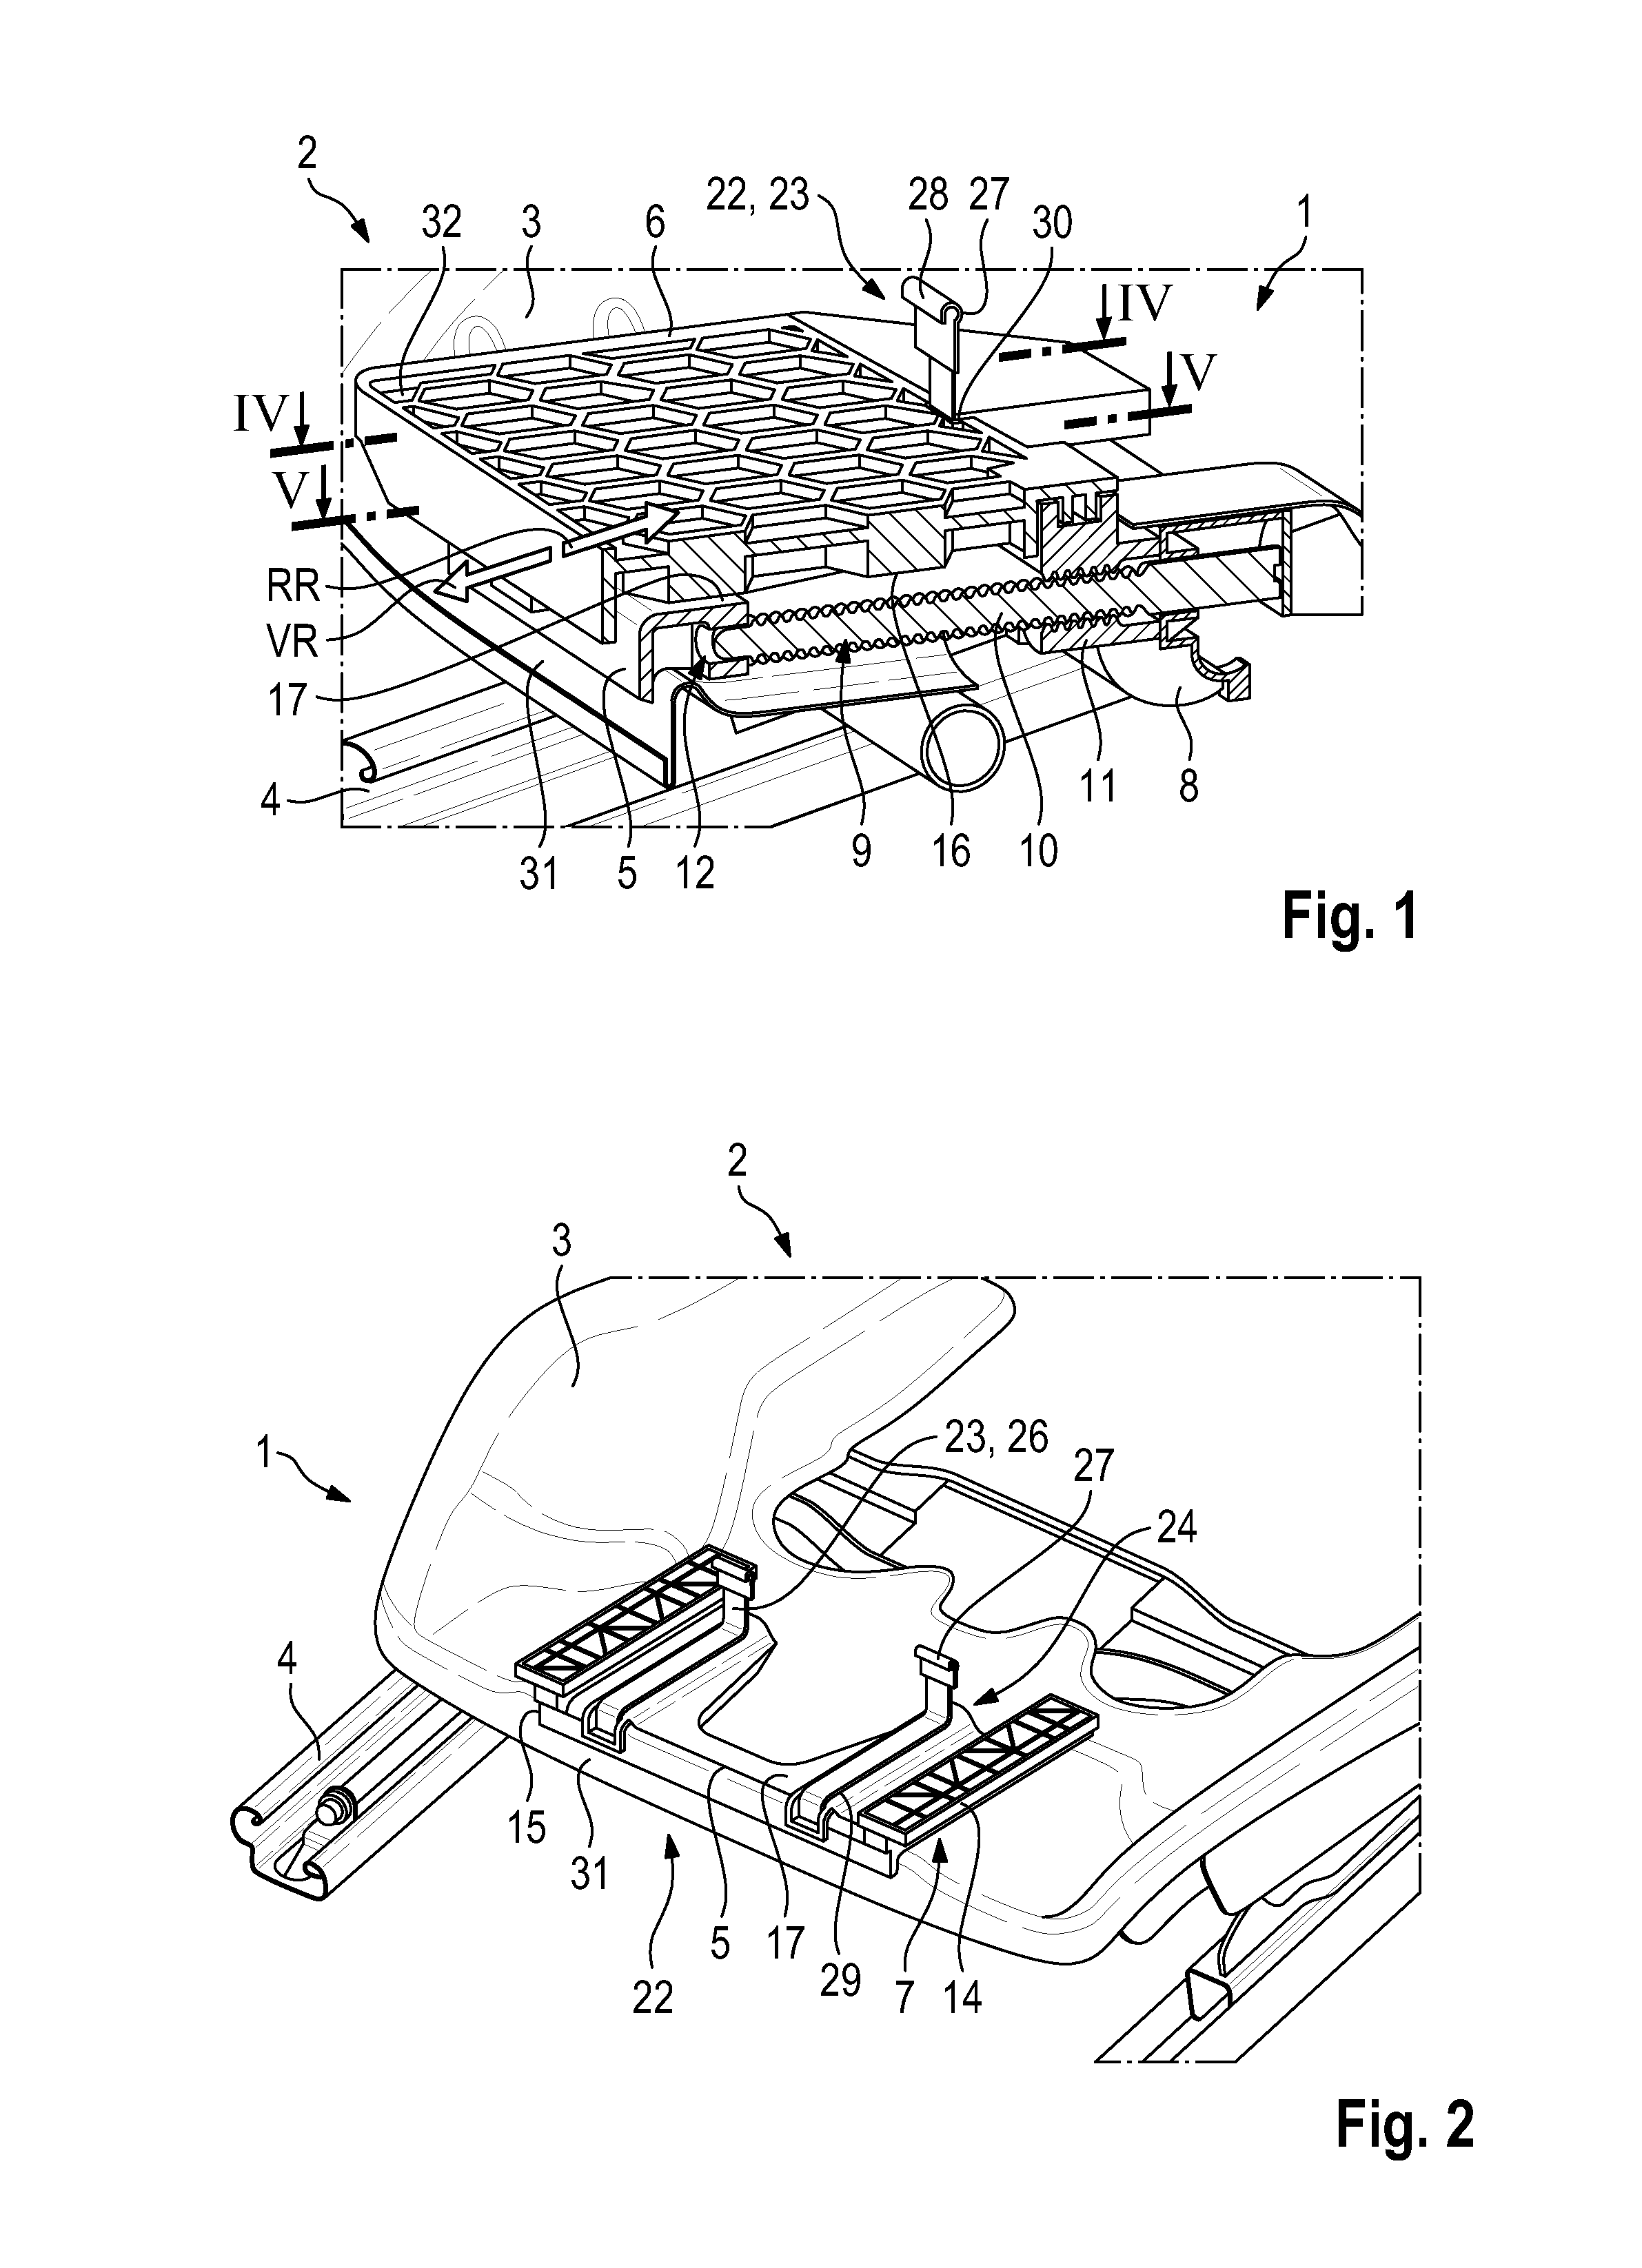 Seat depth adjustment device for a vehicle seat